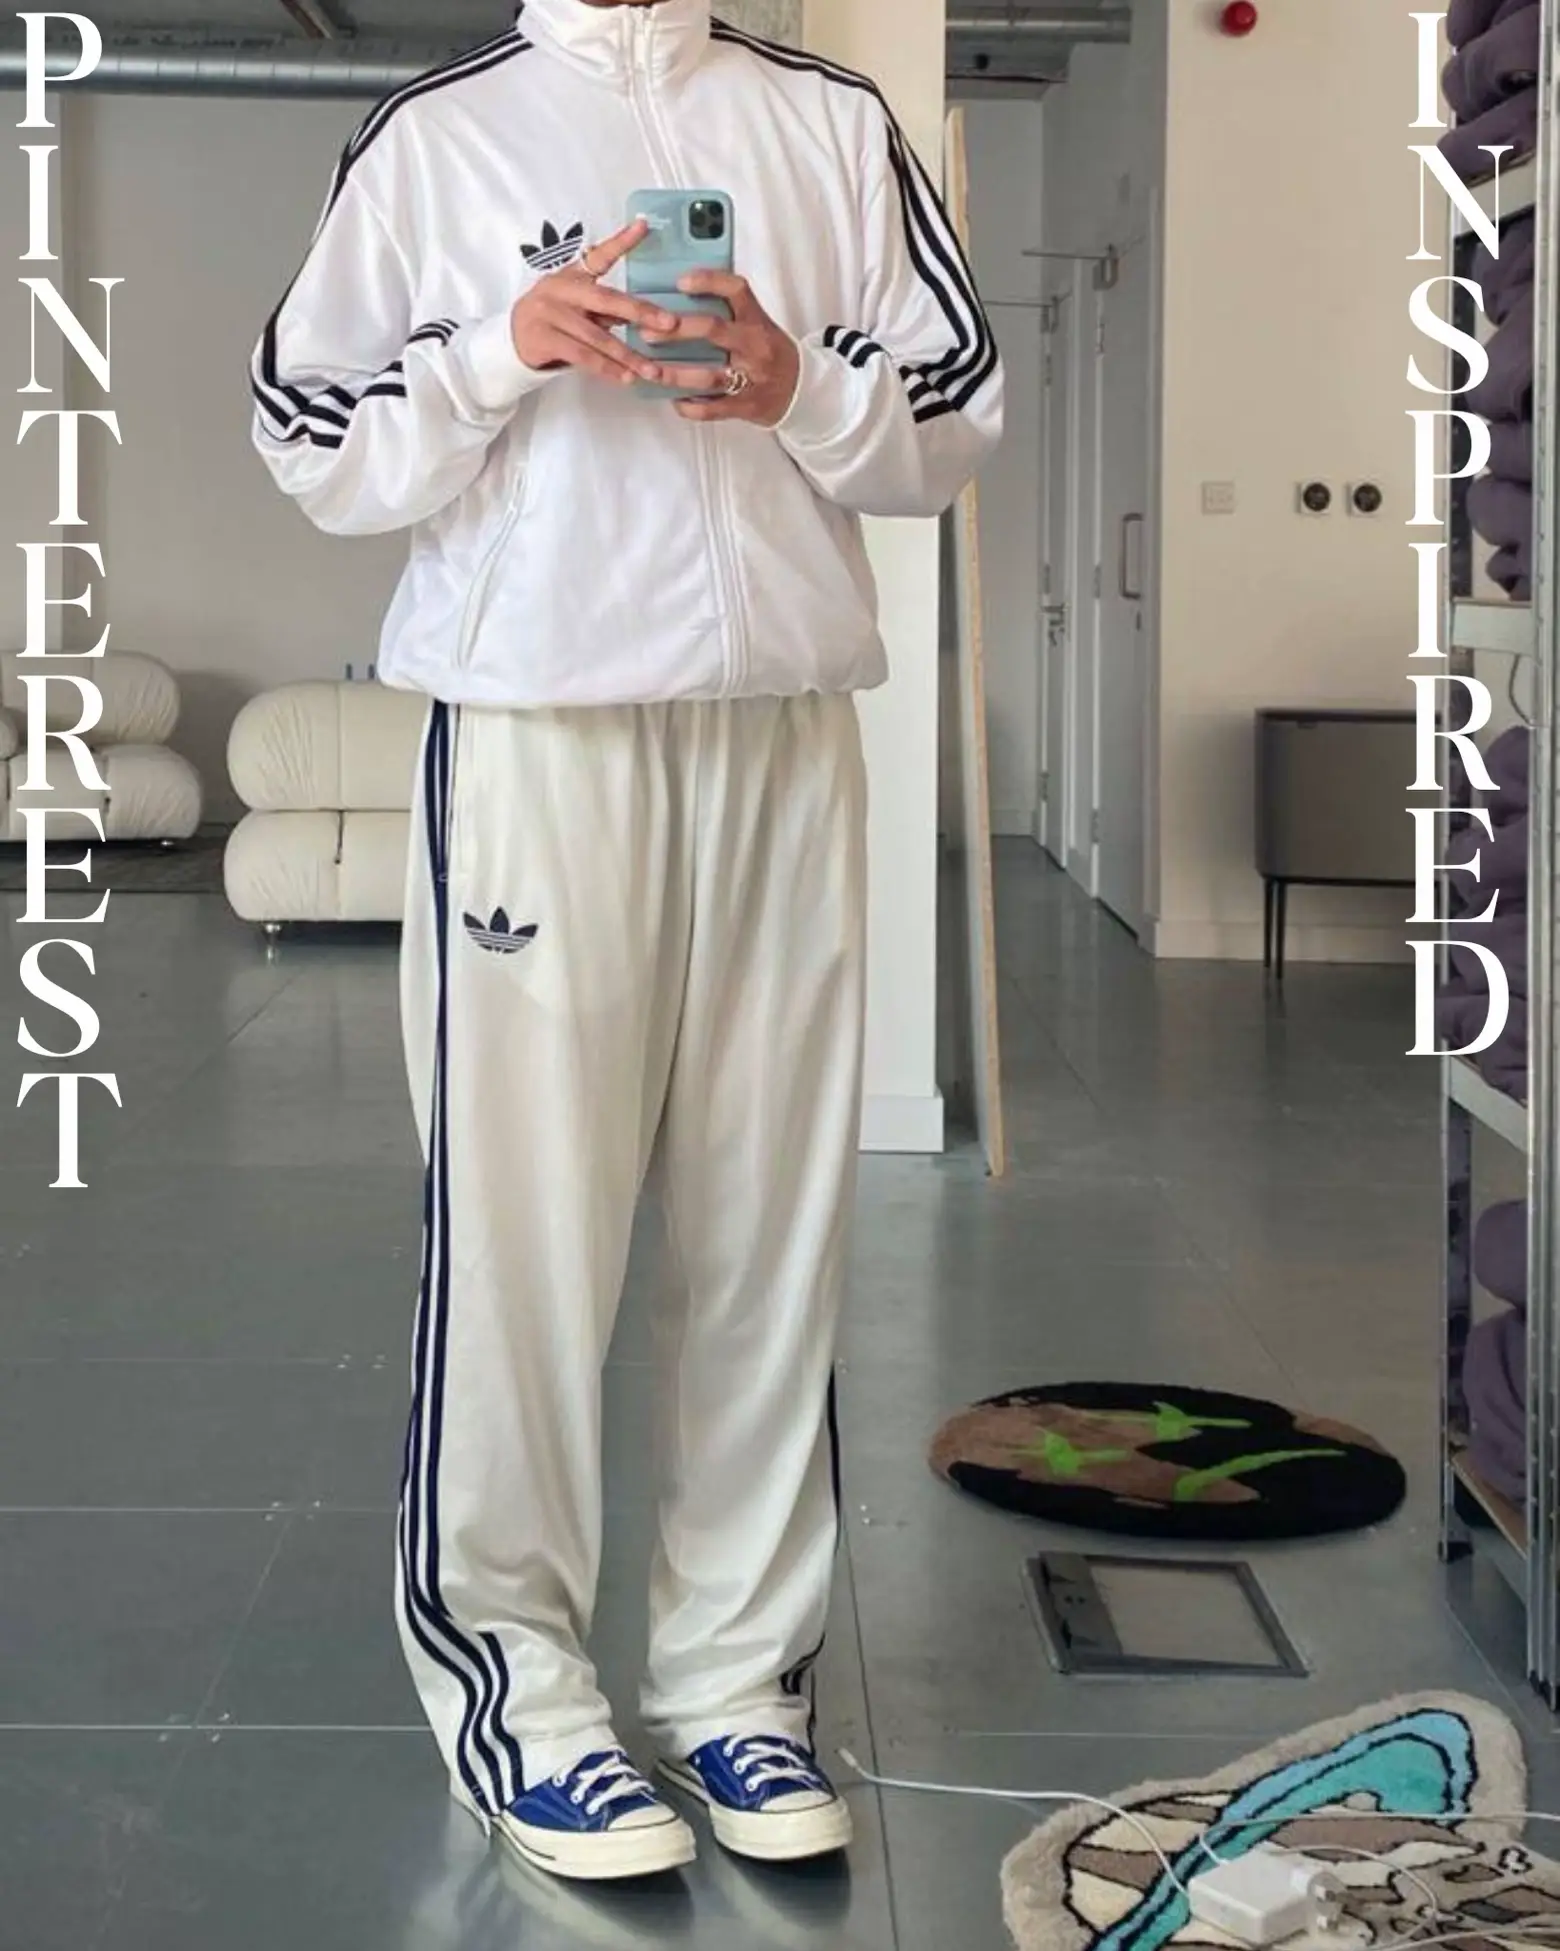 Adidas Pants Outfit Ideas  Outfits With Adidas Pants #Adidas